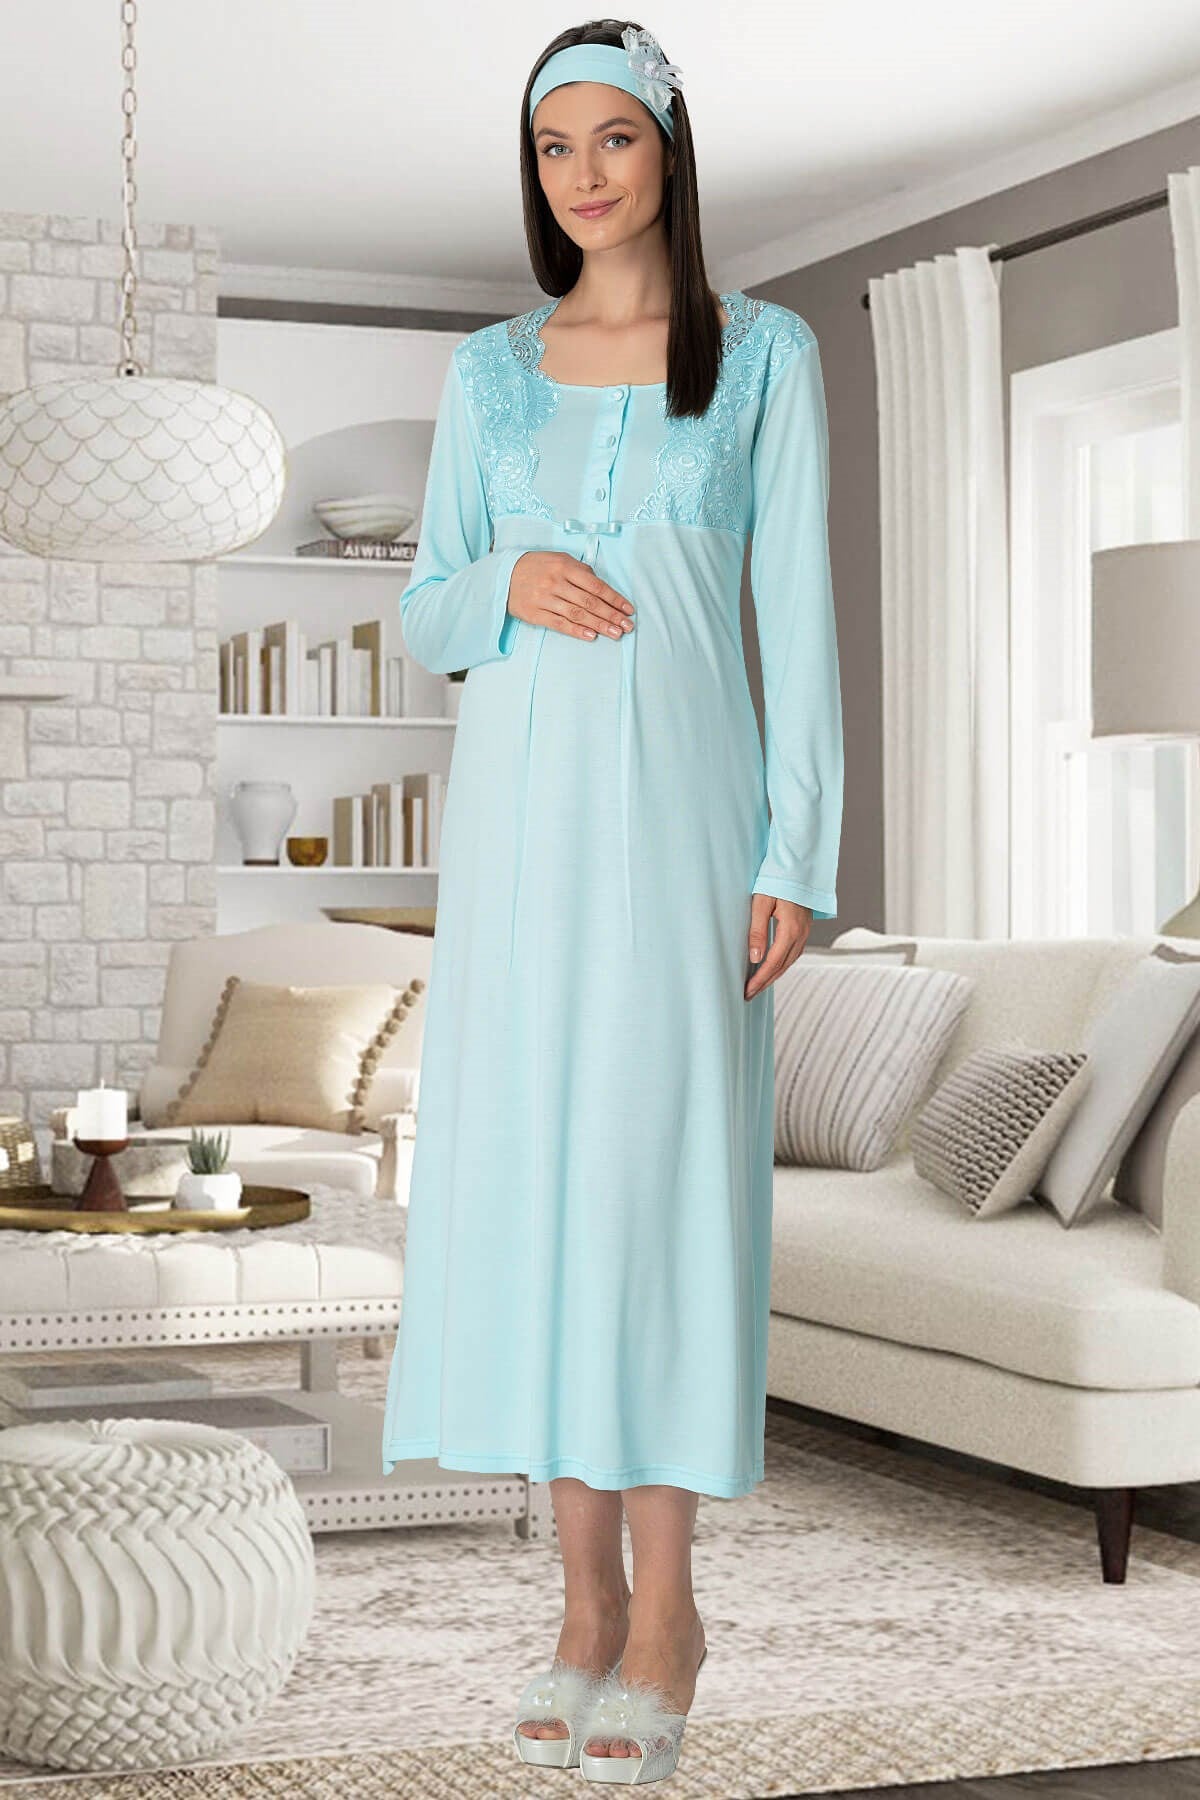 Shopymommy 5355 Lace Collar 4 Pieces Maternity & Nursing Set Turquoise